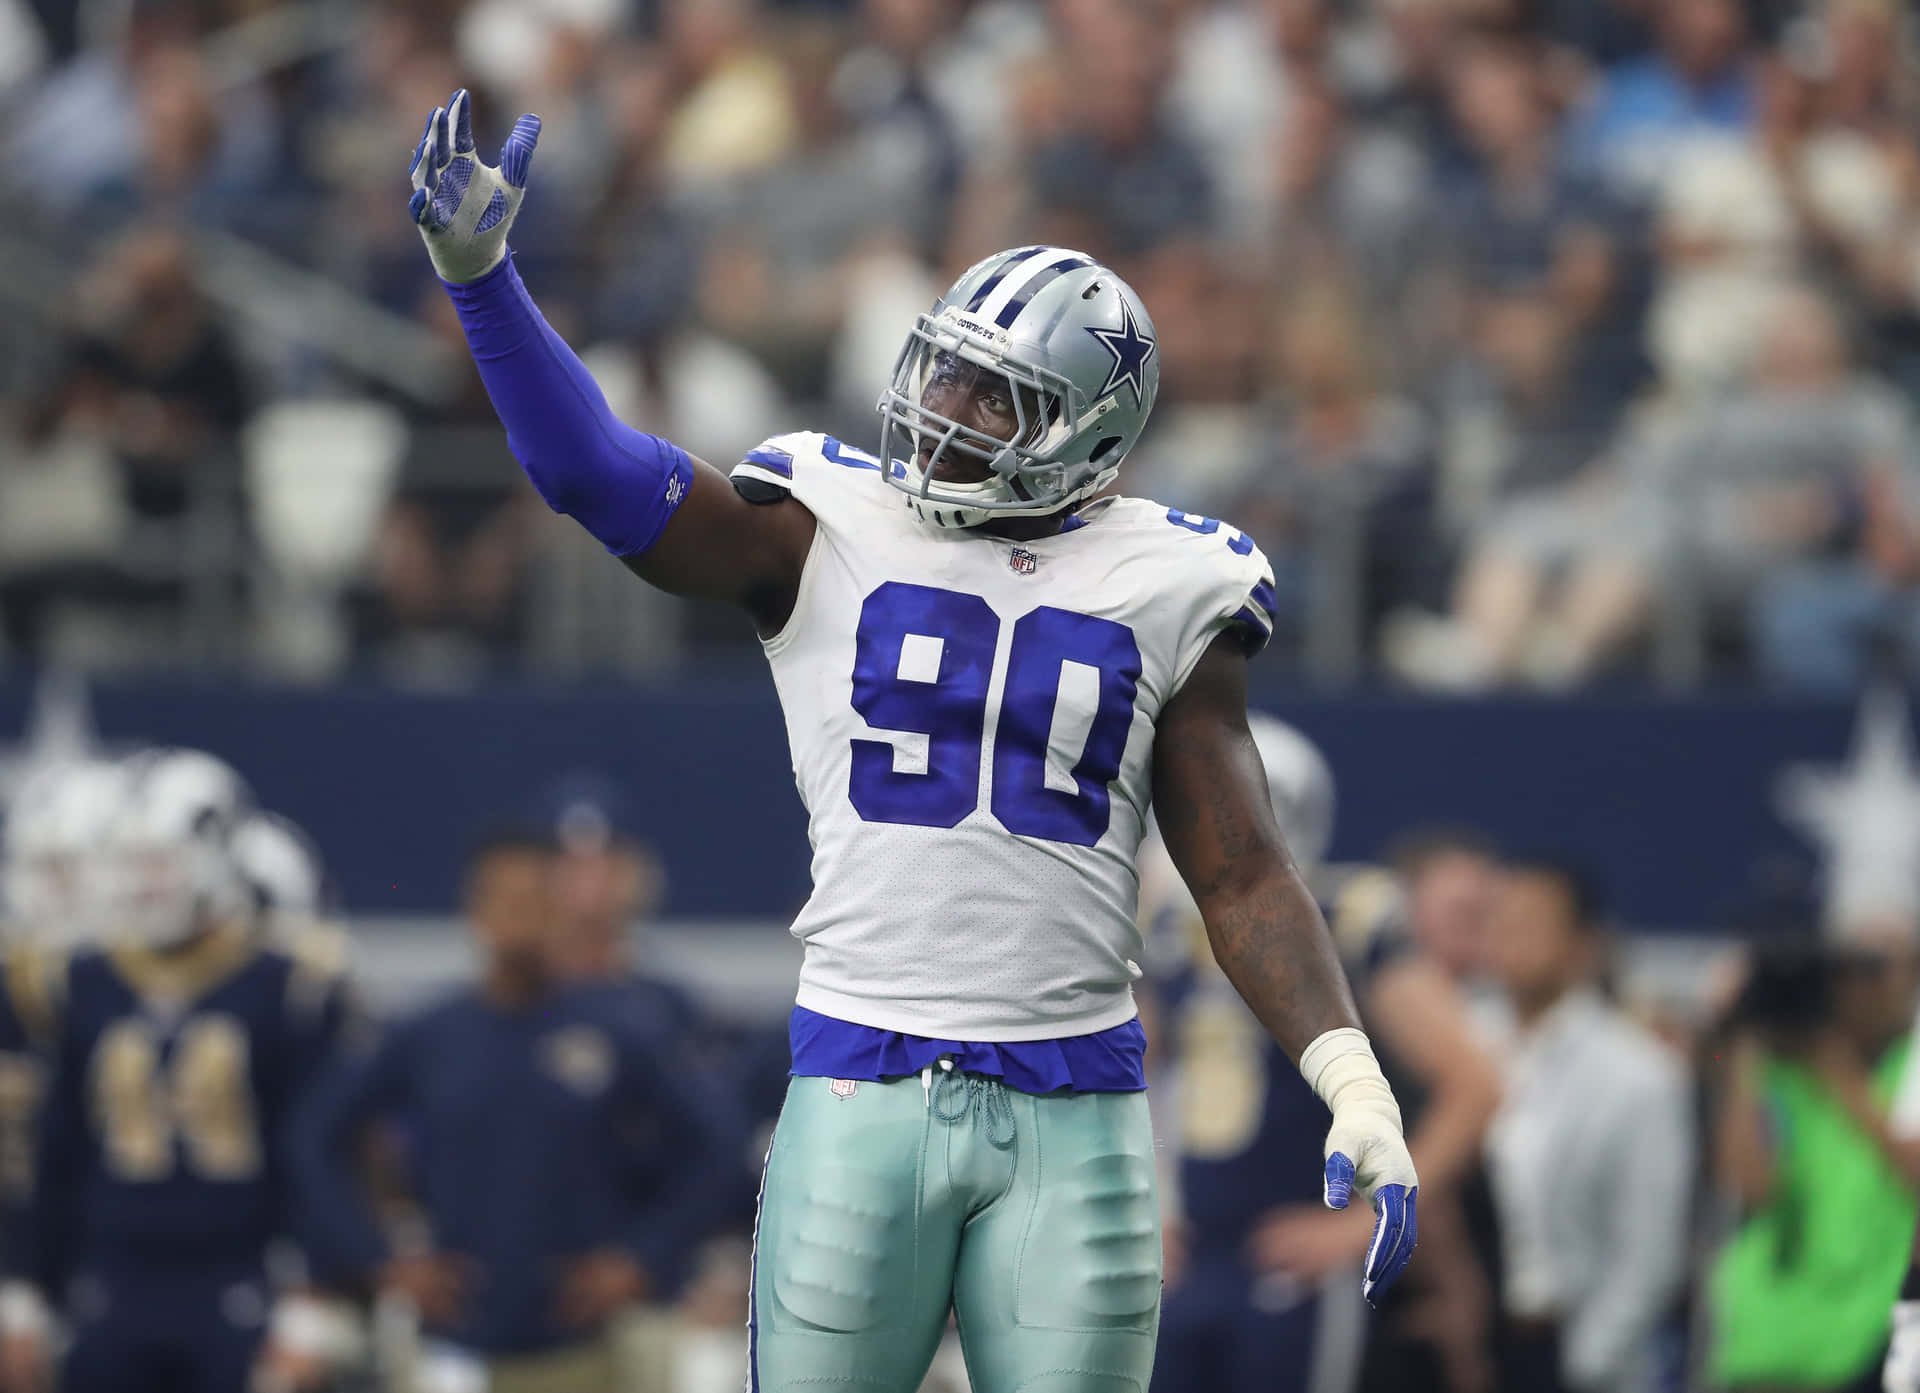 Demarcus Lawrence 4096 X 2972 Wallpaper